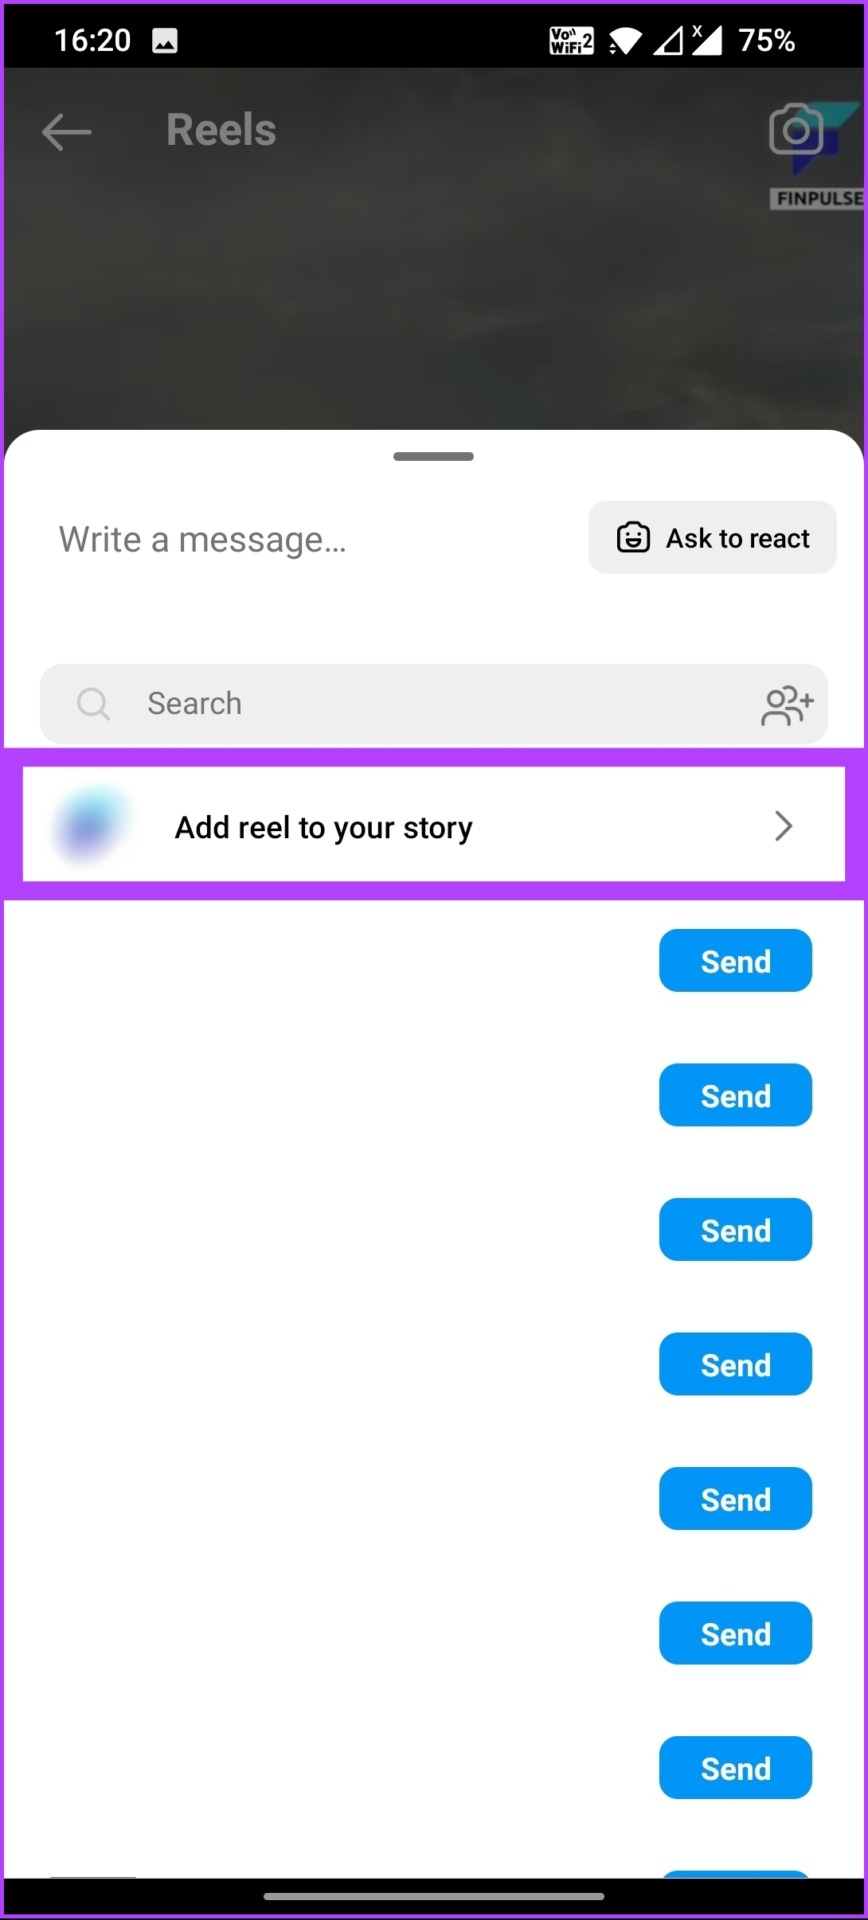 Select the ‘Add Reel to your story’ option